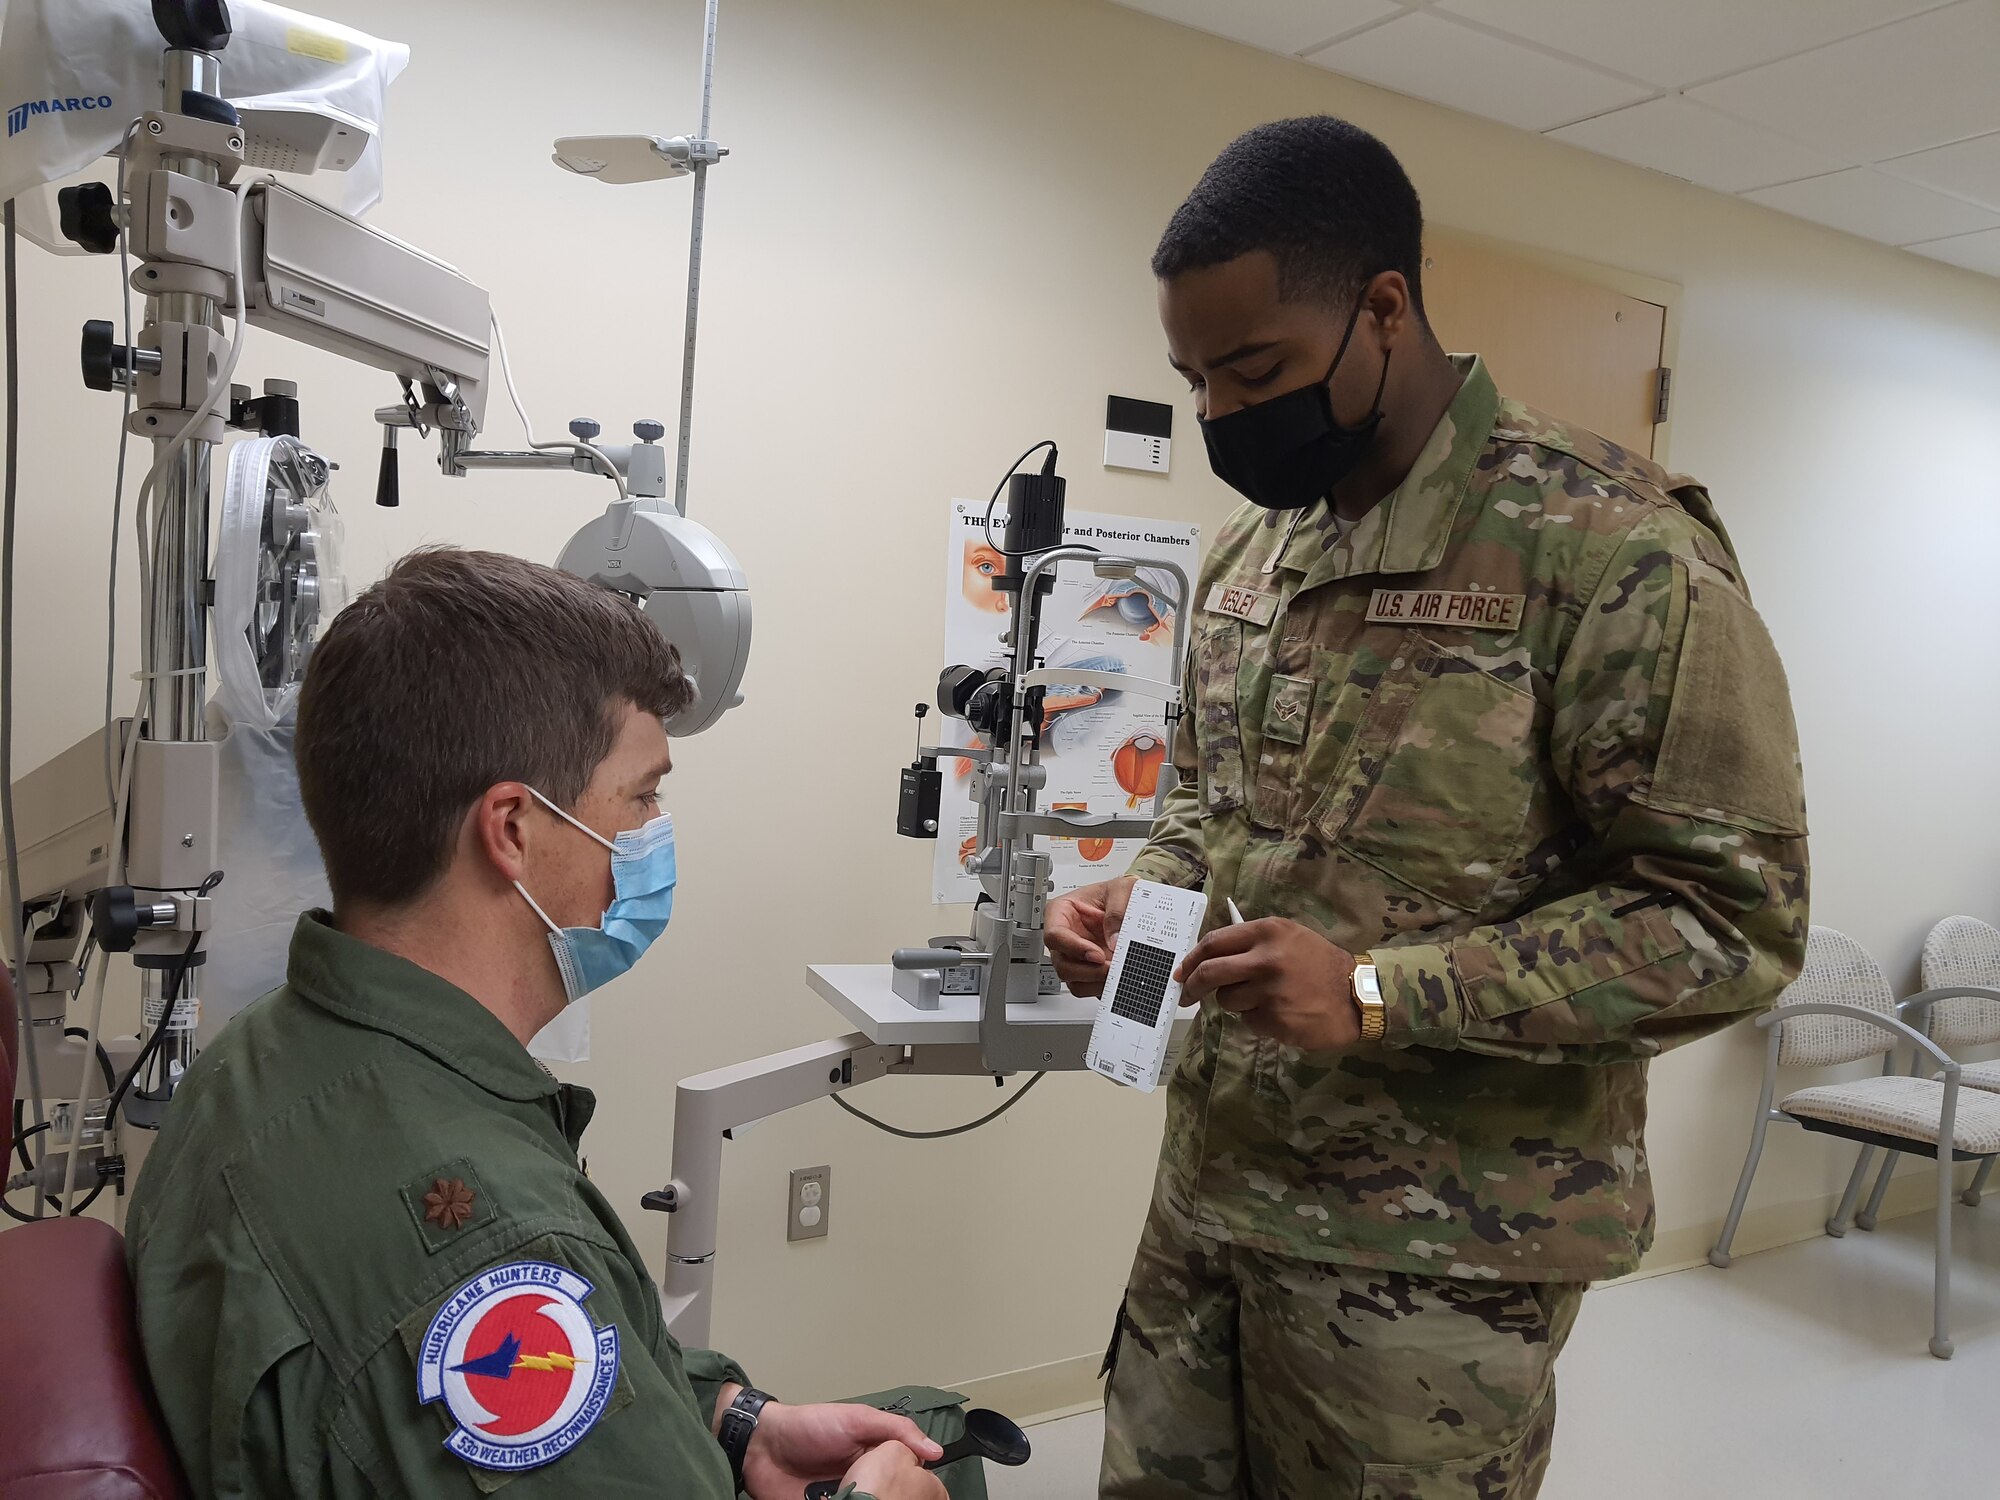 Airman 1st Class Jalen Wesley, 403rd Aeromedical Staging Squadron optometry technician, administers an Amsler grid eye exam, used to check central vision irregularities, to Maj. Wesley Dembek, 53rd Weather Reconnaissance Squadron pilot, Feb 6, 2021. The 403rd ASTS is responsible for ensuring that the Reserve Citizen Airmen of the 403rd Wing are current or 'green' on their Individual Medical Readiness status; which includes providing immunizations, optometry services, dental x-rays and exams, lab draws, audiograms, and physicals. (U.S. Air Force photo by Master Sgt. Jessica Kendziorek/ photo permission granted by Maj. Wesley Dembek)